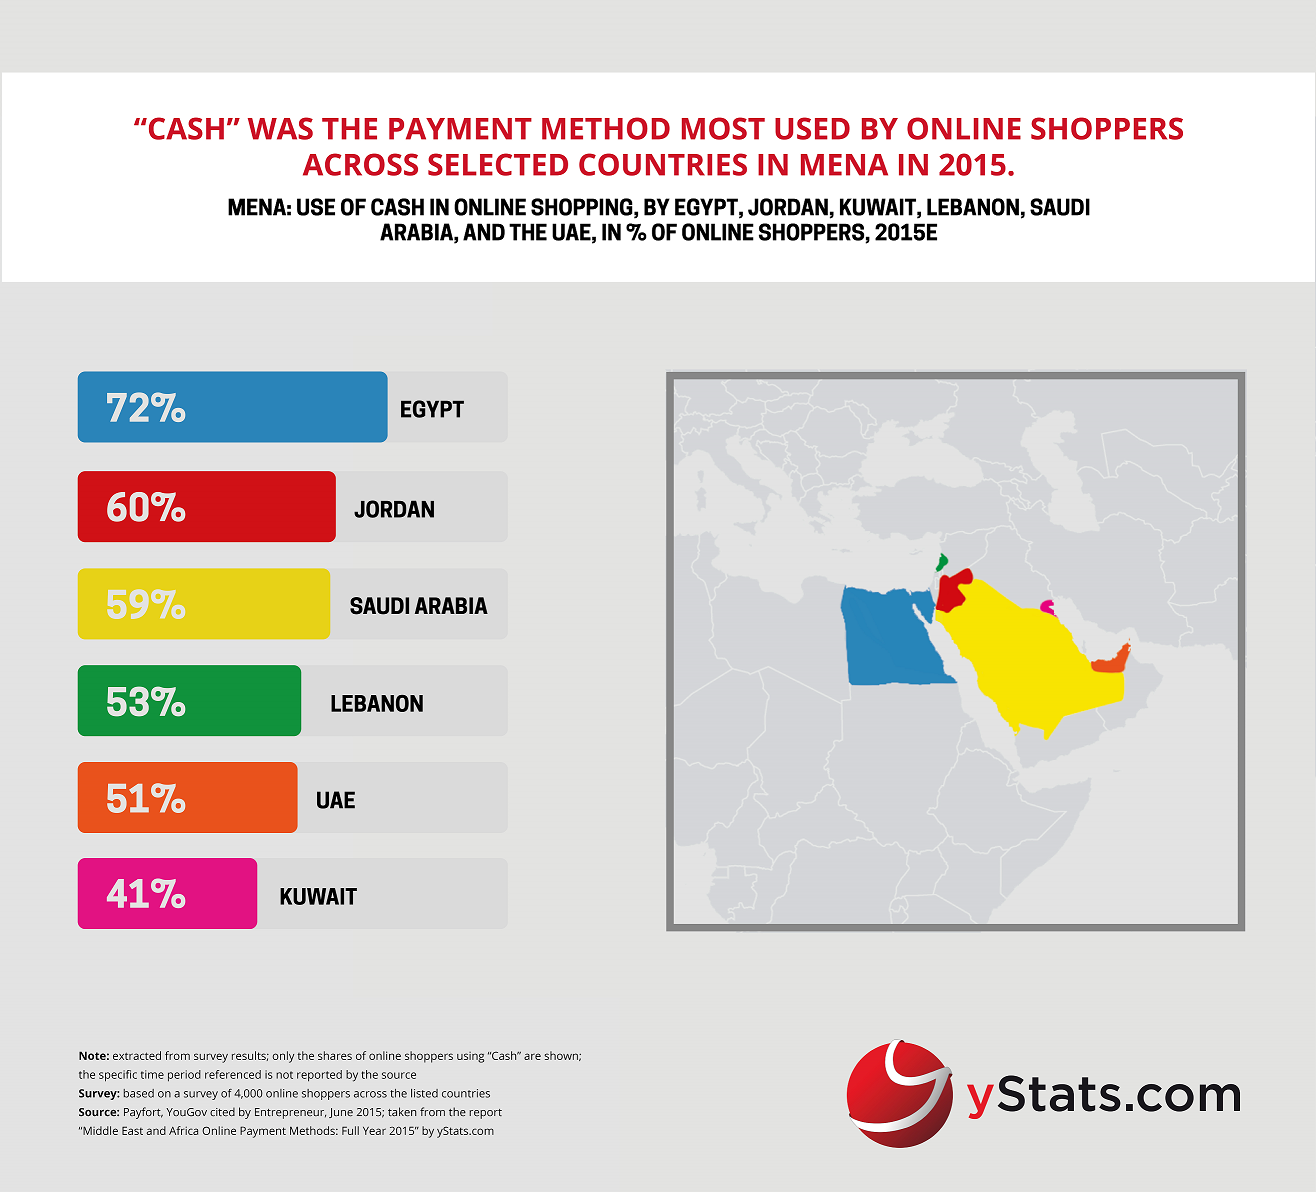 Middle East & Africa Online Payment Methods_Full Year 2015